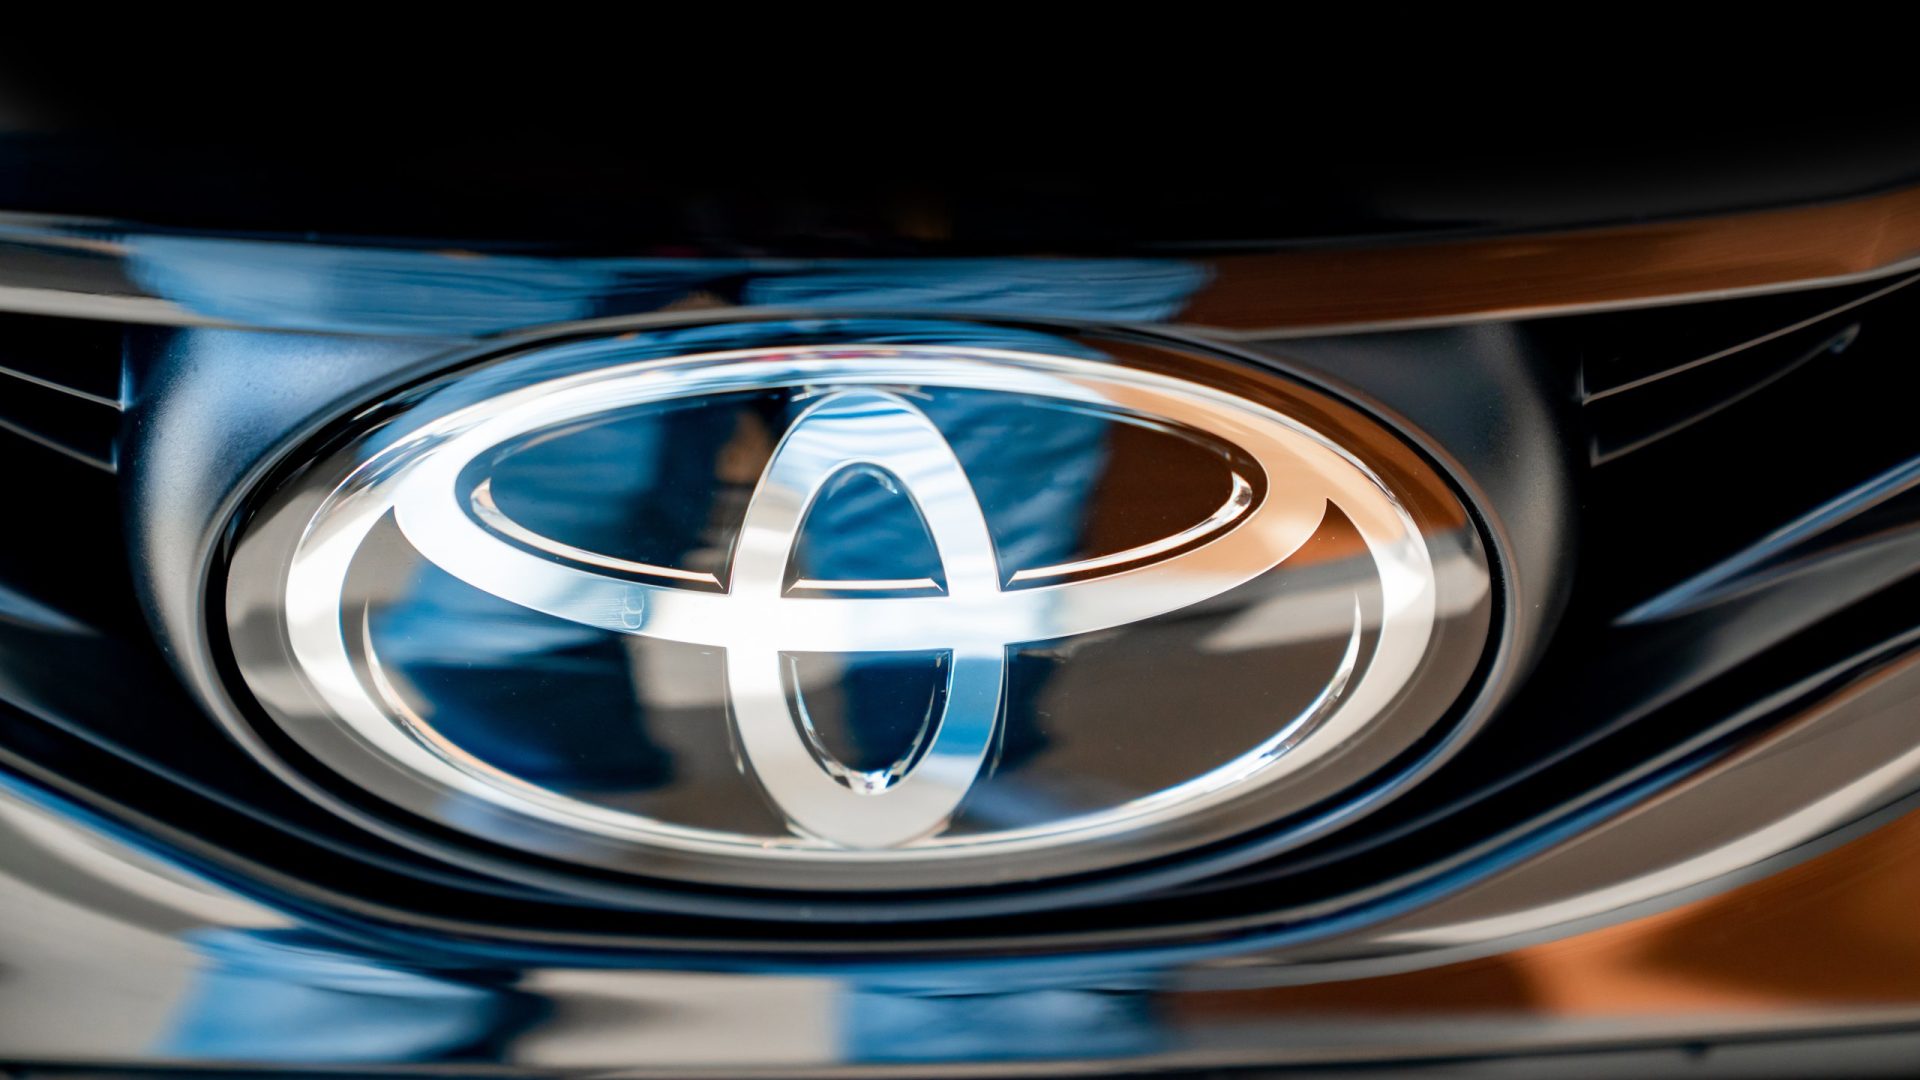 Close up photo of the Toyota logo 